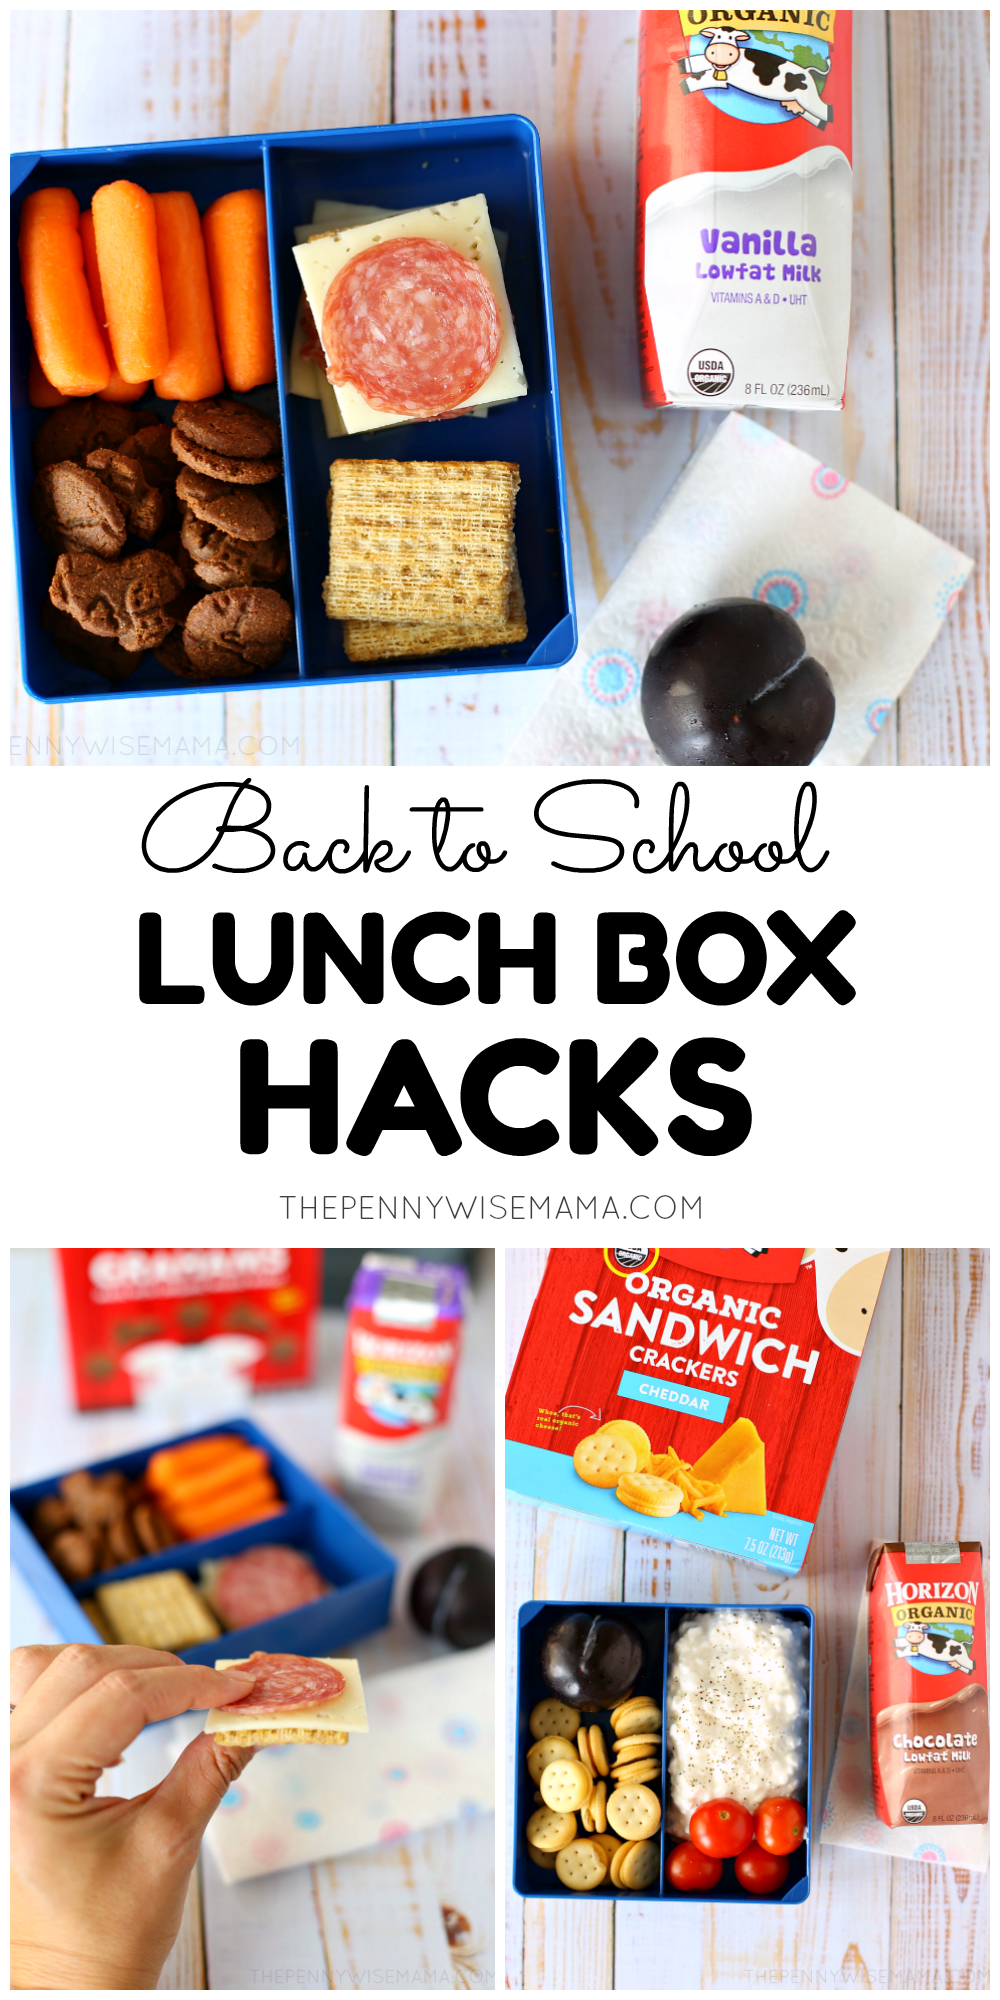 10 Lunch Box Hacks for Back to School